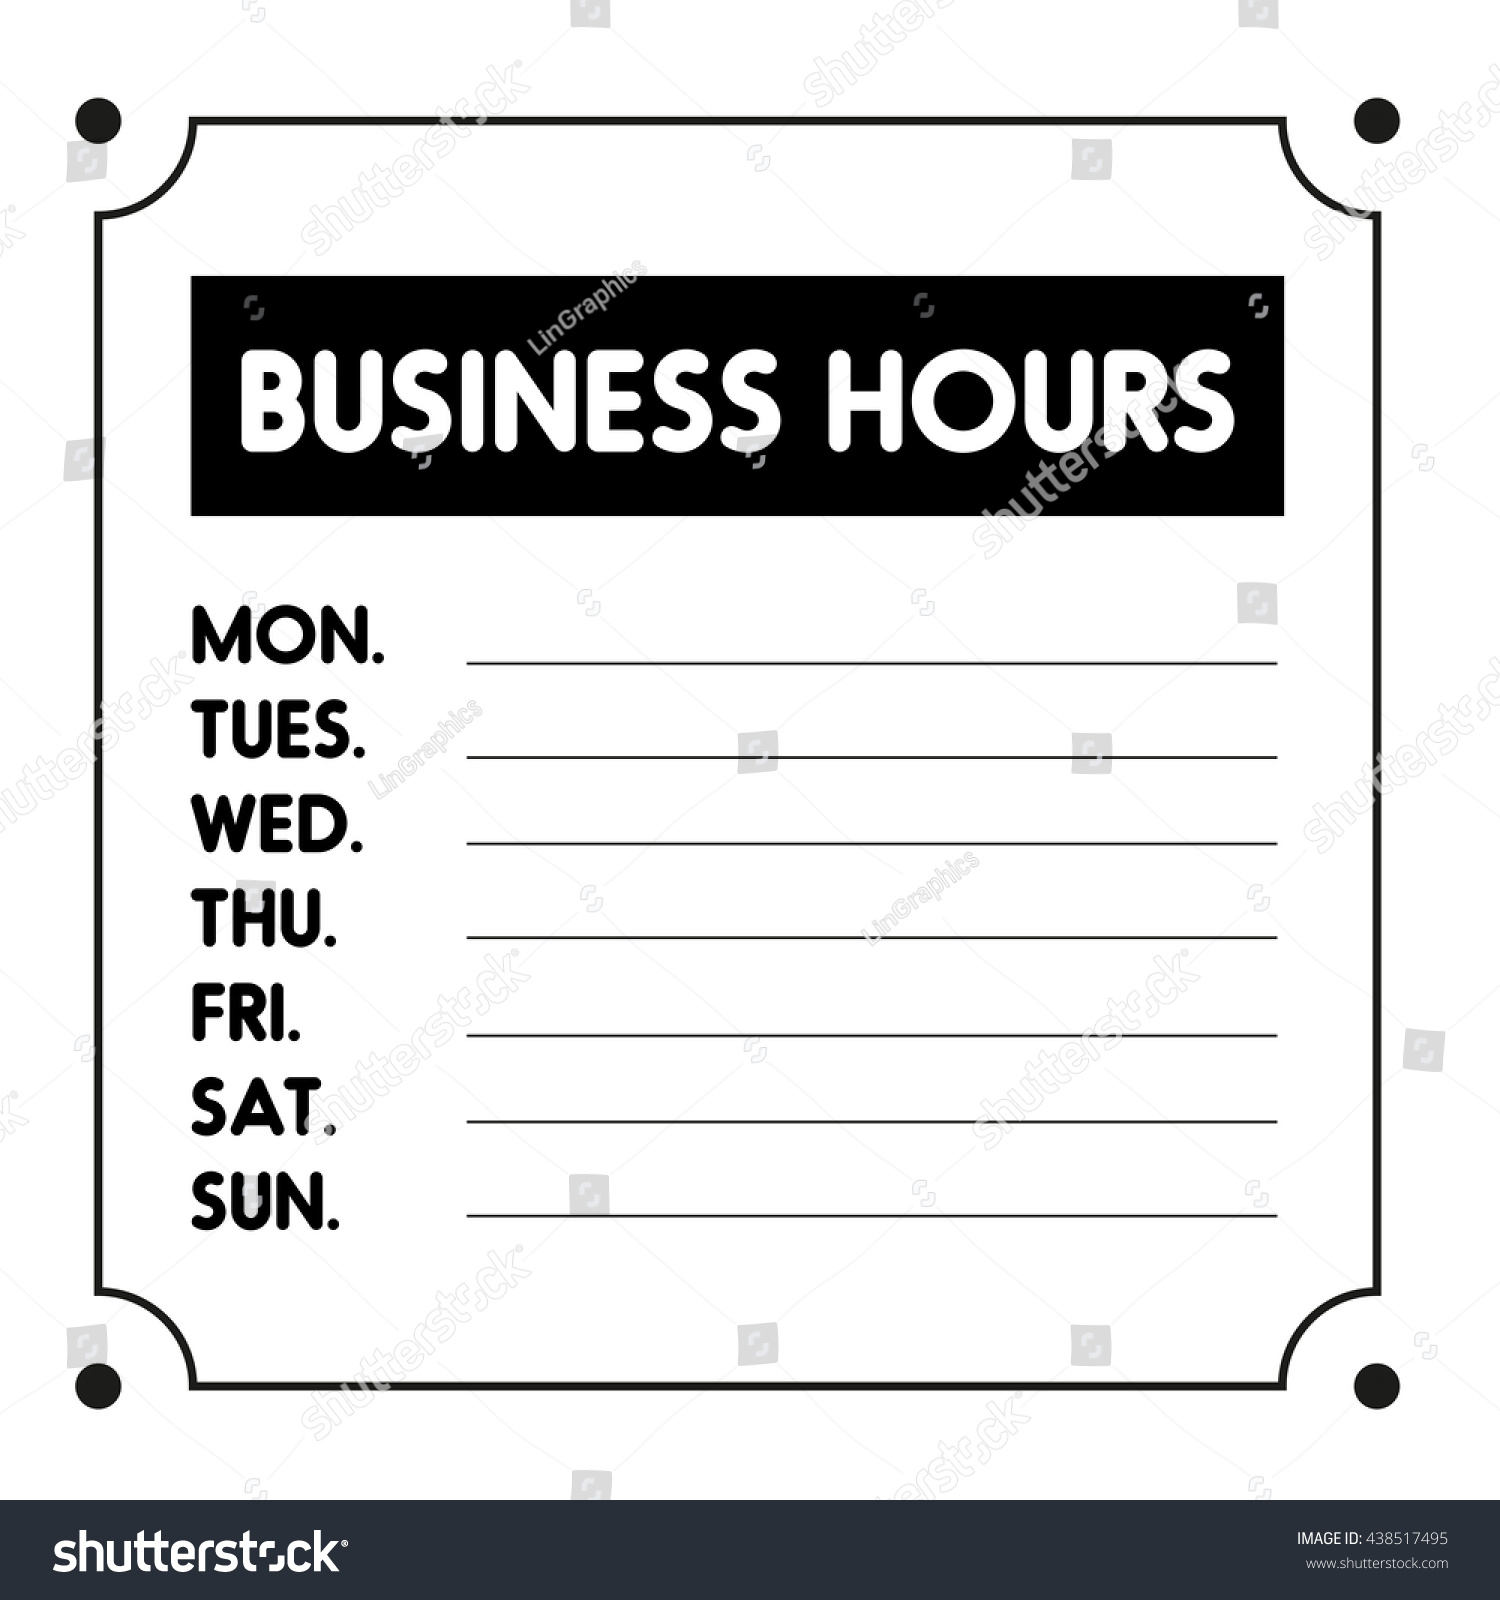 Business Hours Template from image.shutterstock.com